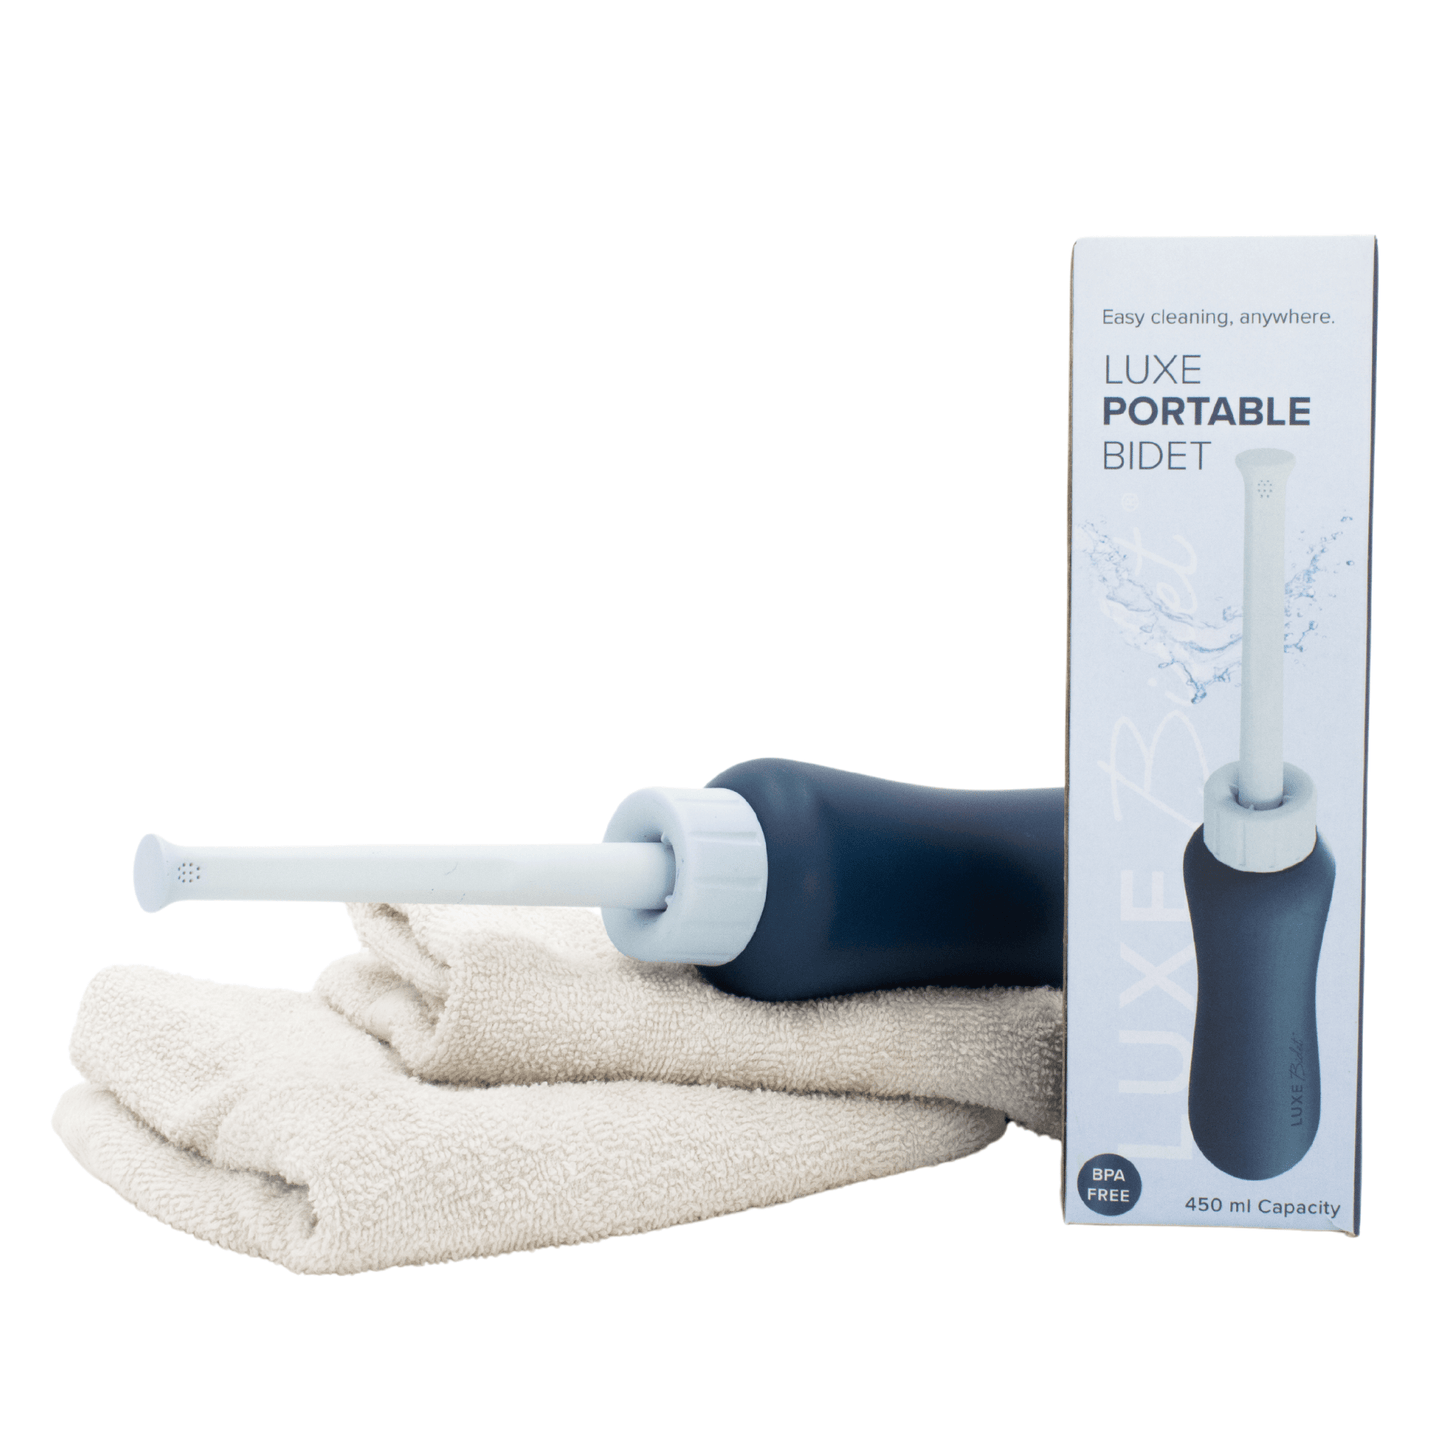 LUXE Portable Bidet rest on towels with its packaging. *Towels not included.